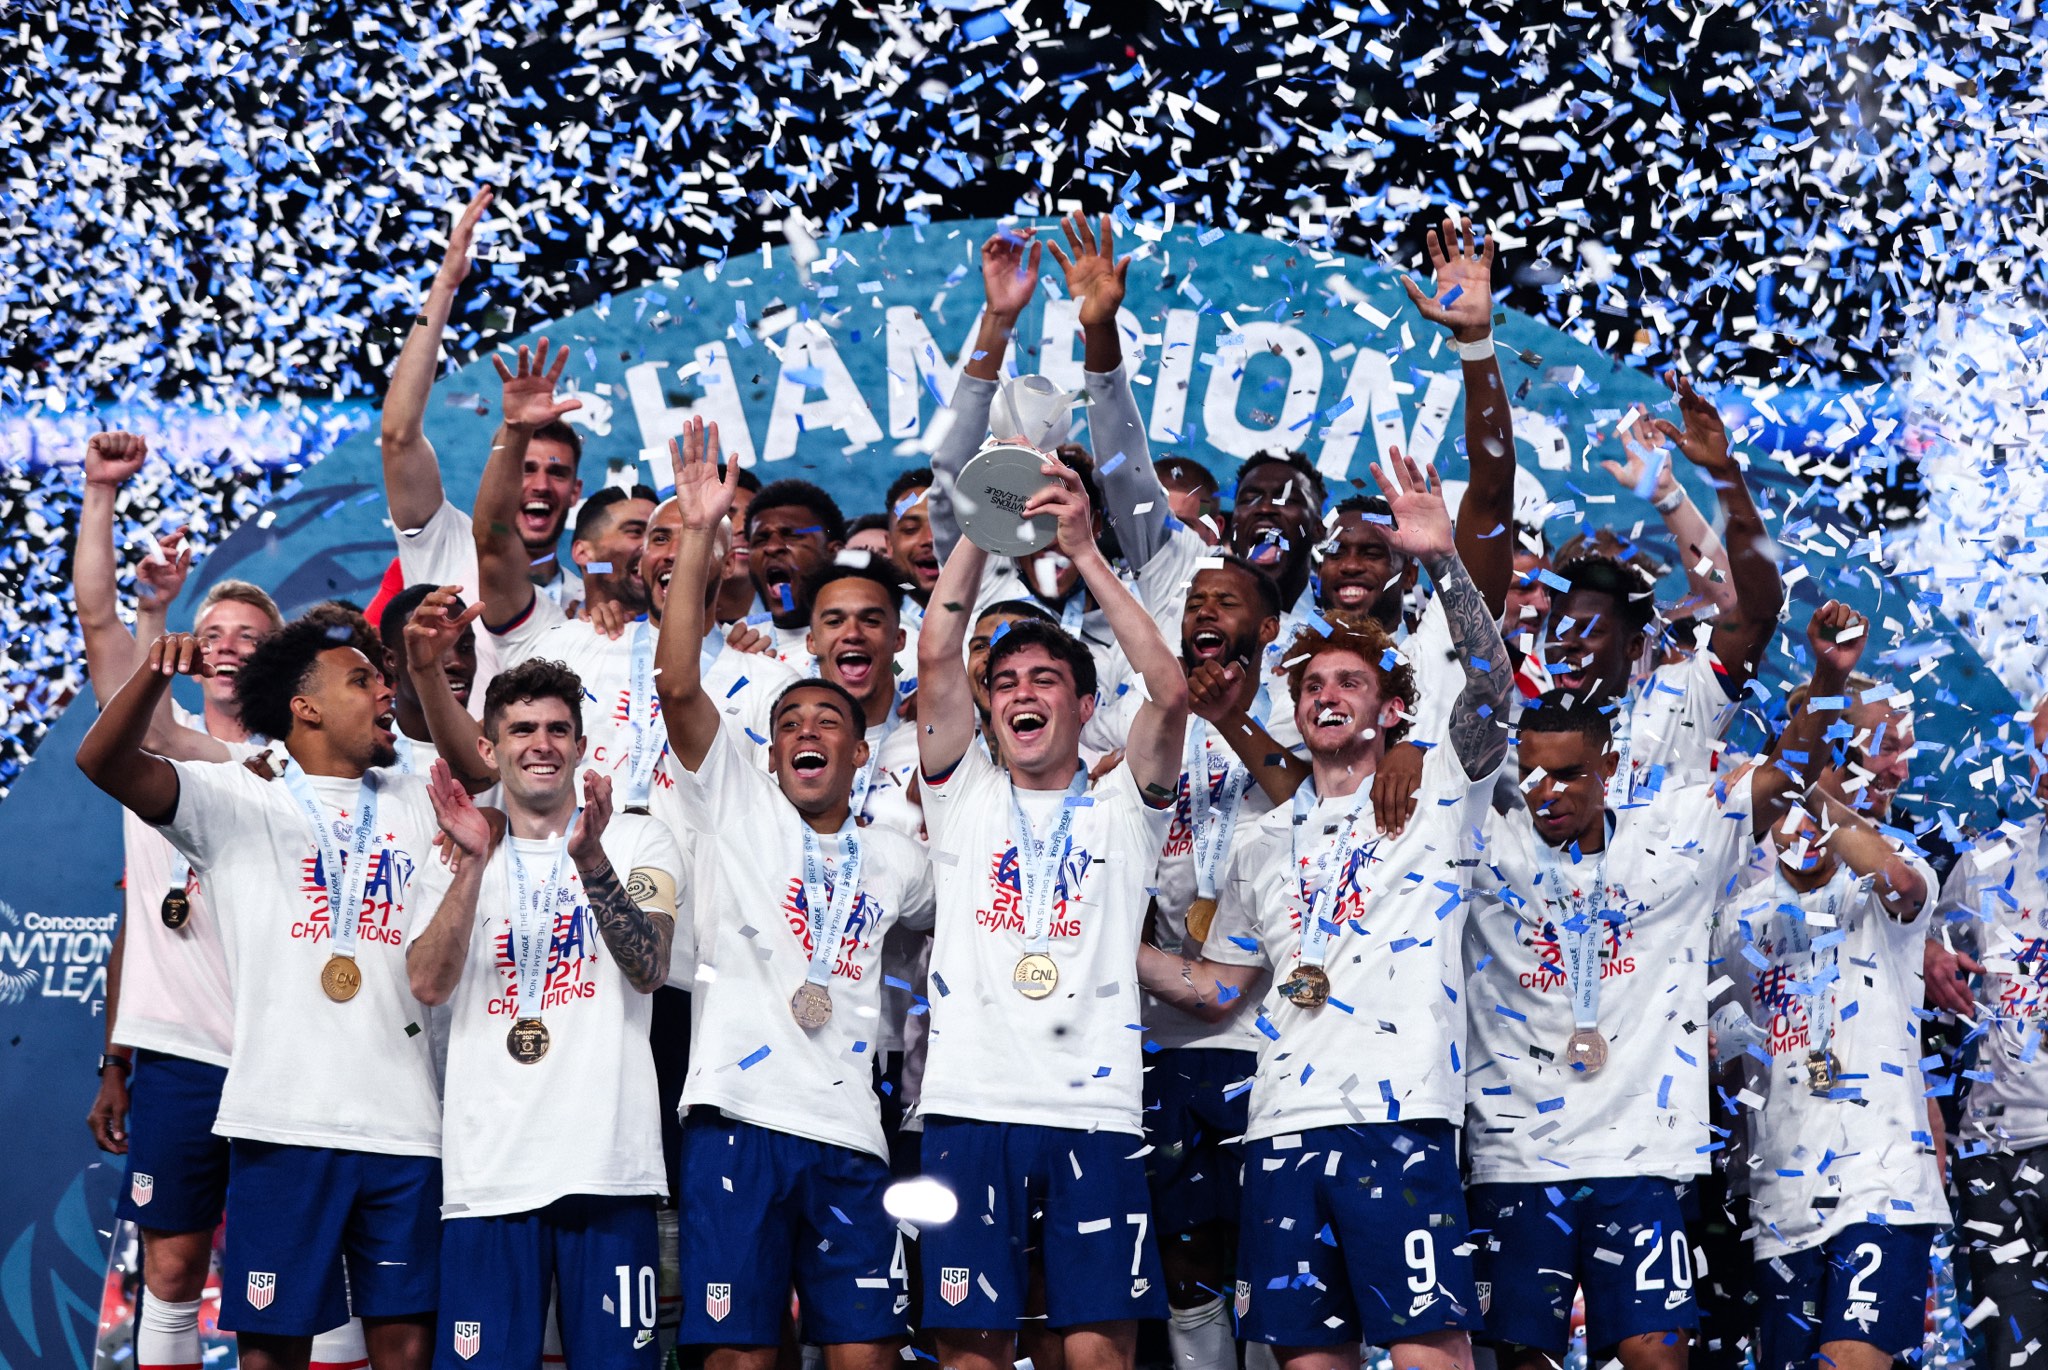 U.S. SOCCER IN FOCUS 20 USMNT Inaugural Nations League Champs